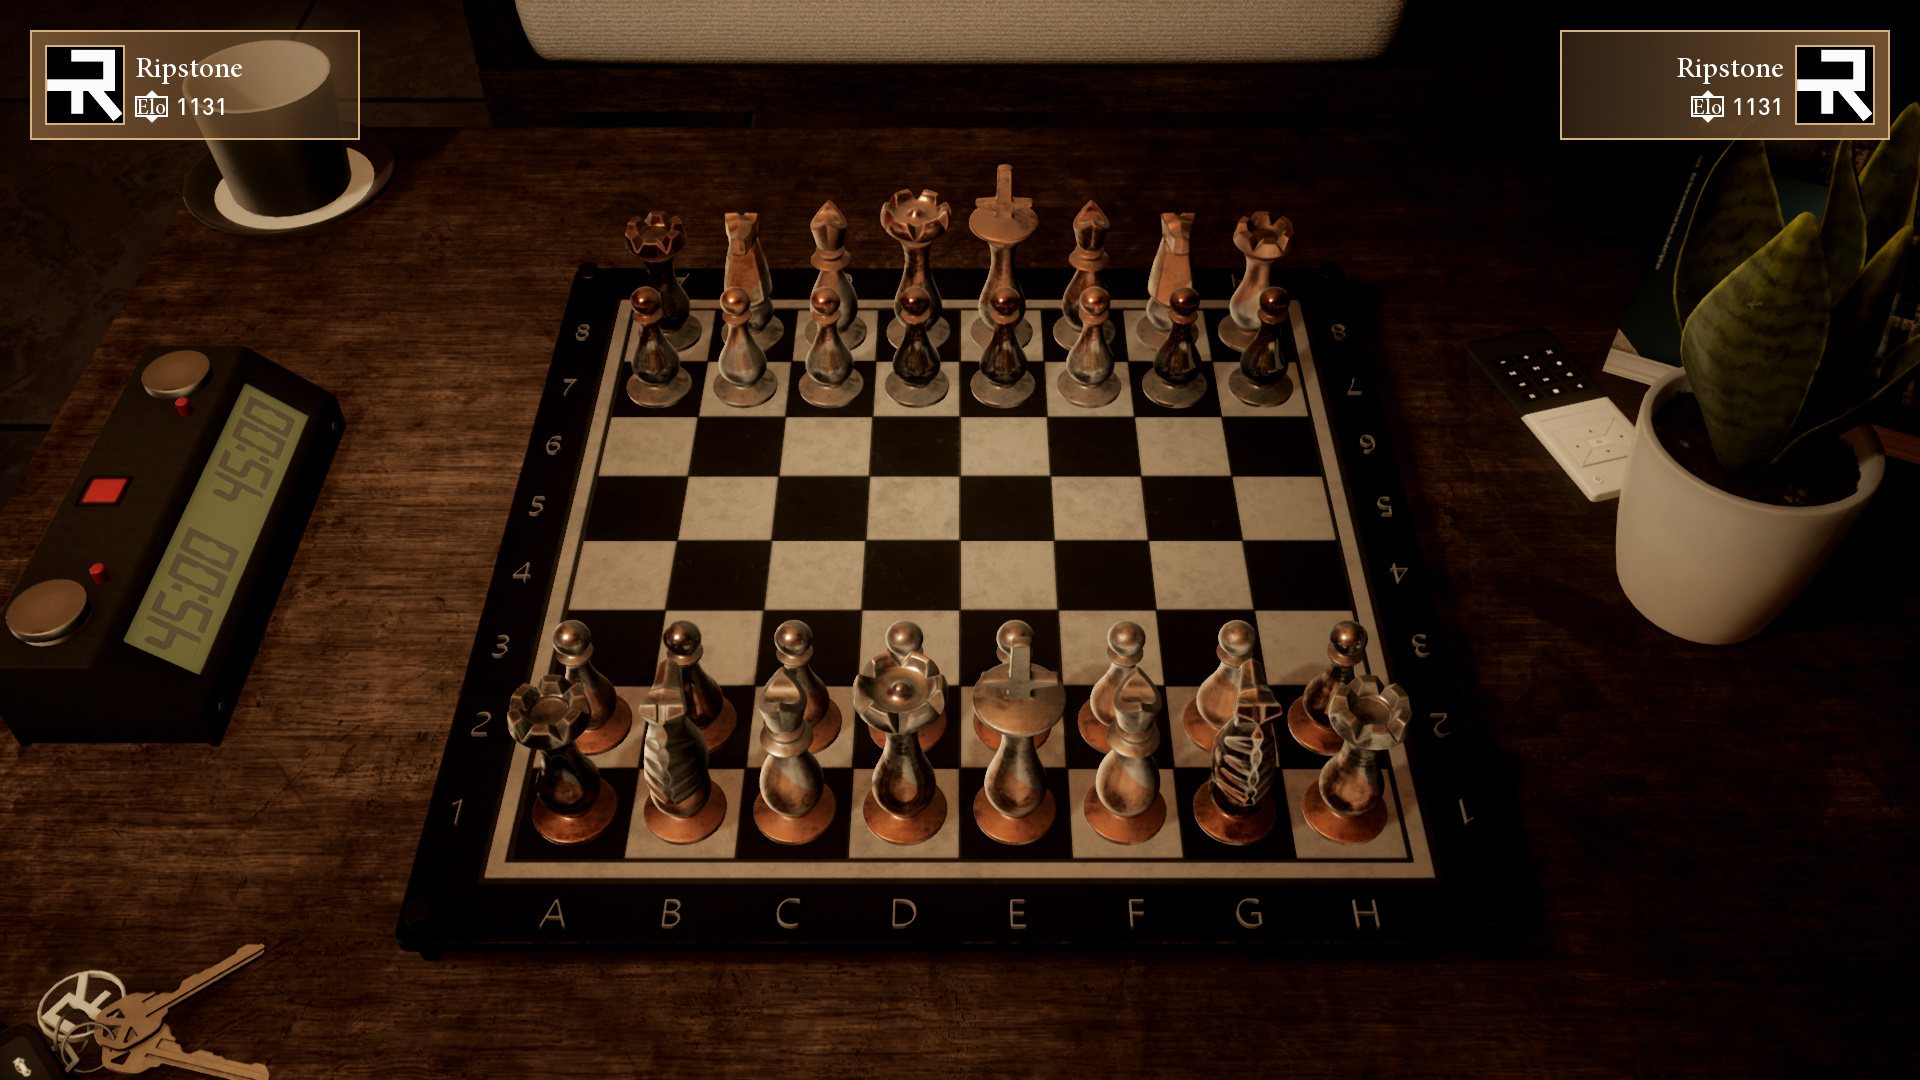 Chess Ultra - Introducing Cross-play with Epic Games - Steam News